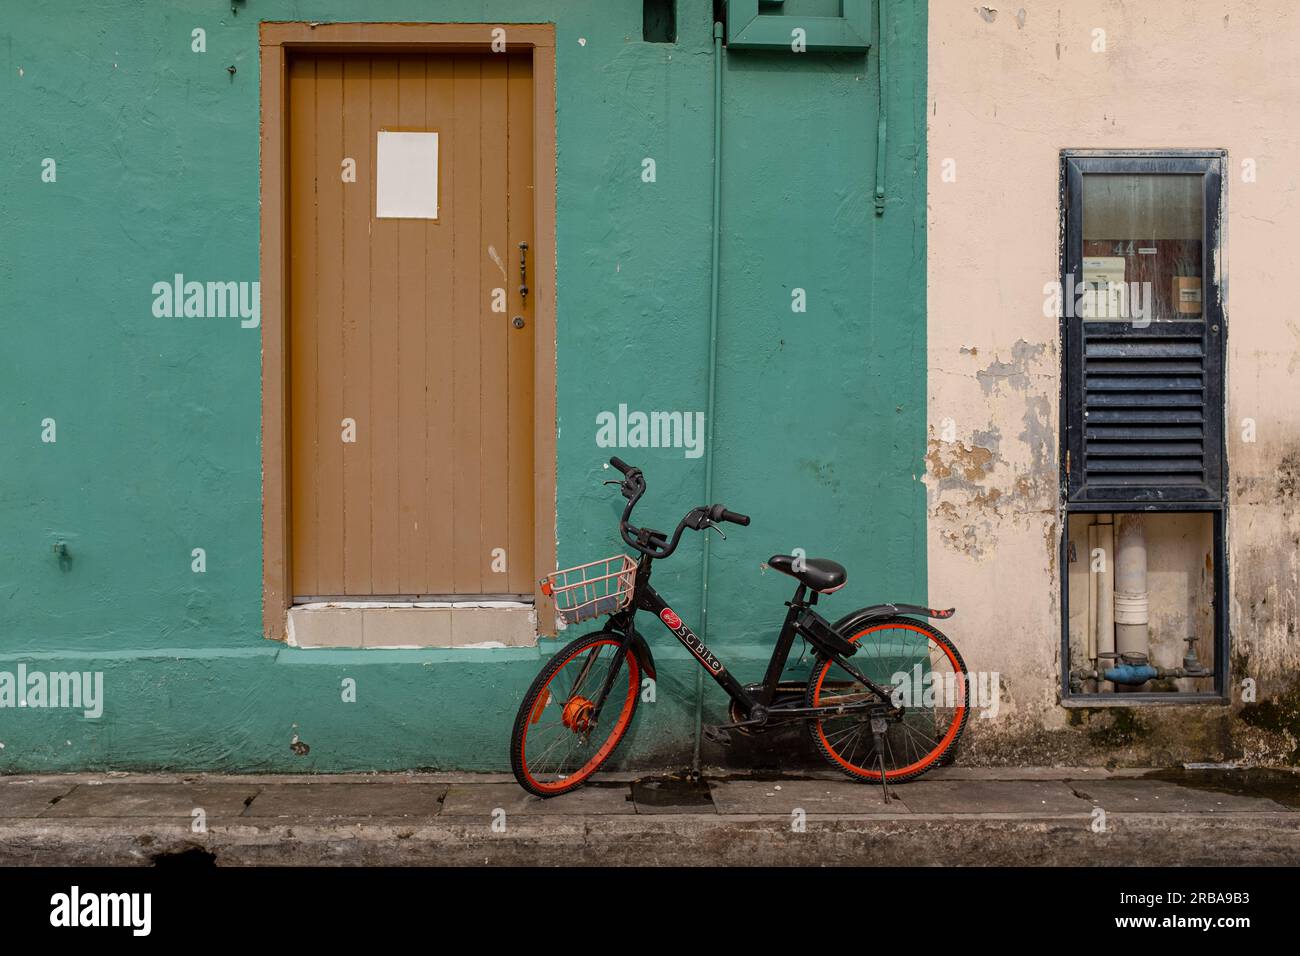 Kampong Glam, Singapore - December 19, 2022: A child bicycle against a green painted wall with no people Stock Photo